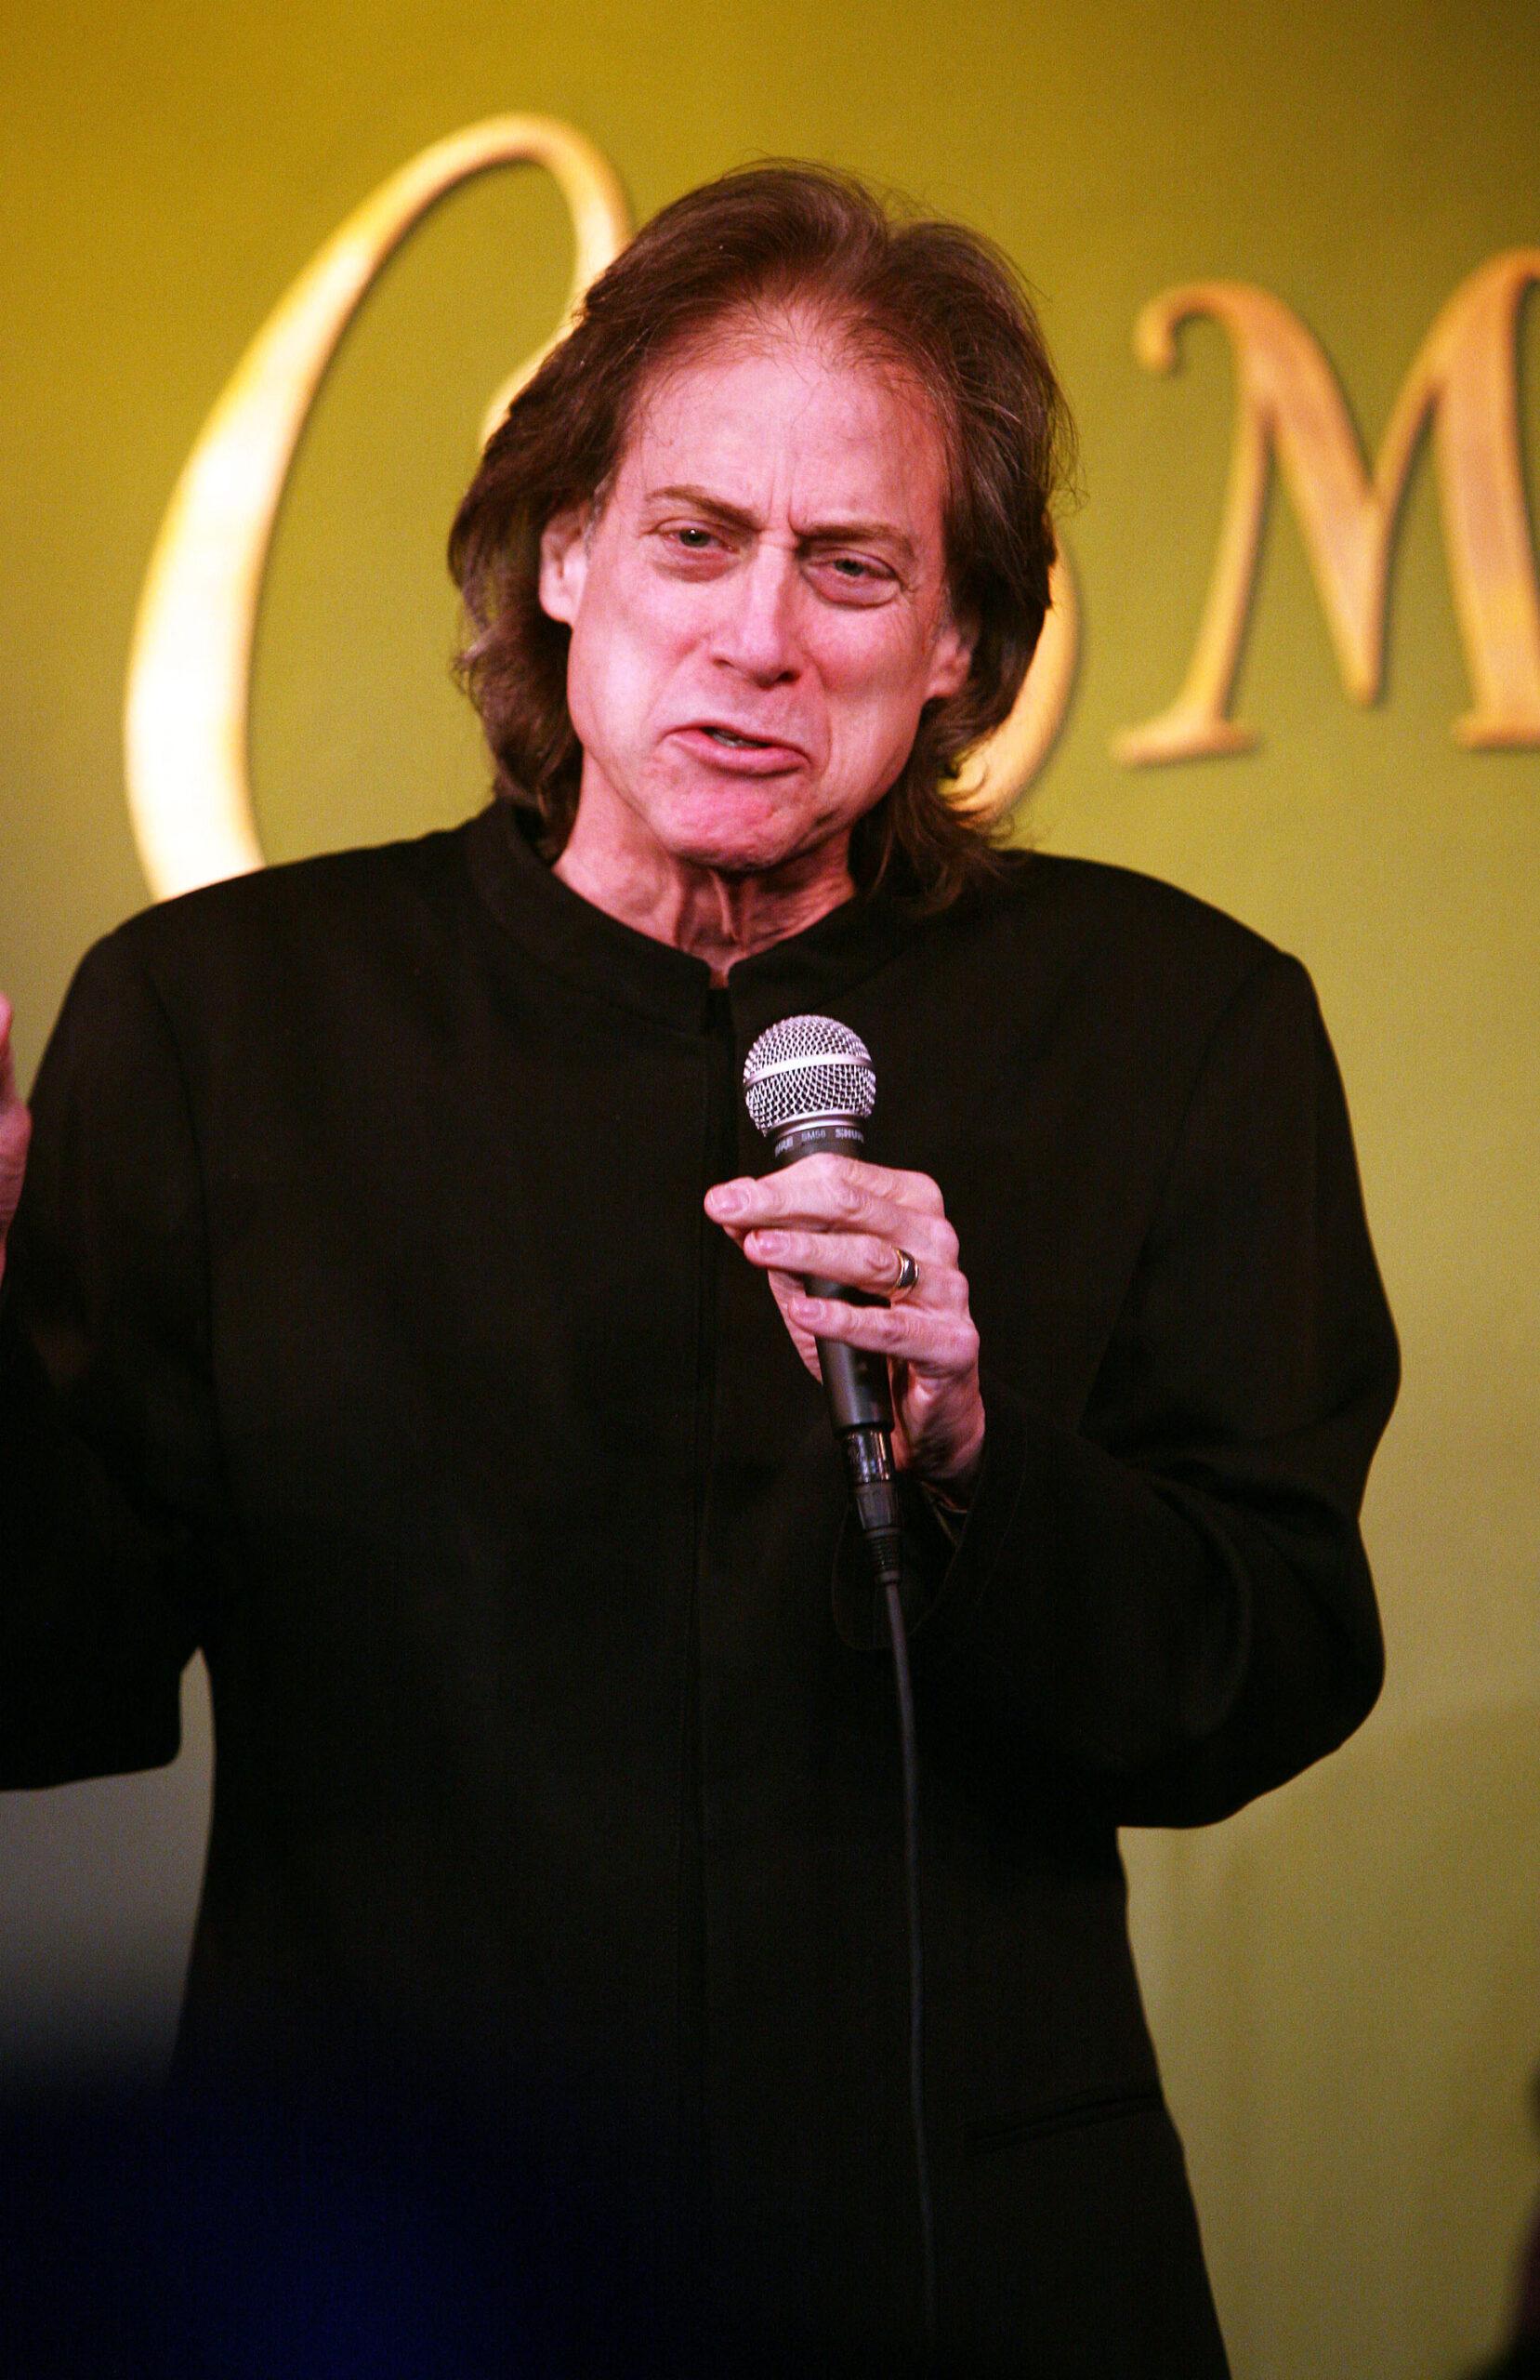 Richard Lewis at COMIX NY - EXCLUSIVE